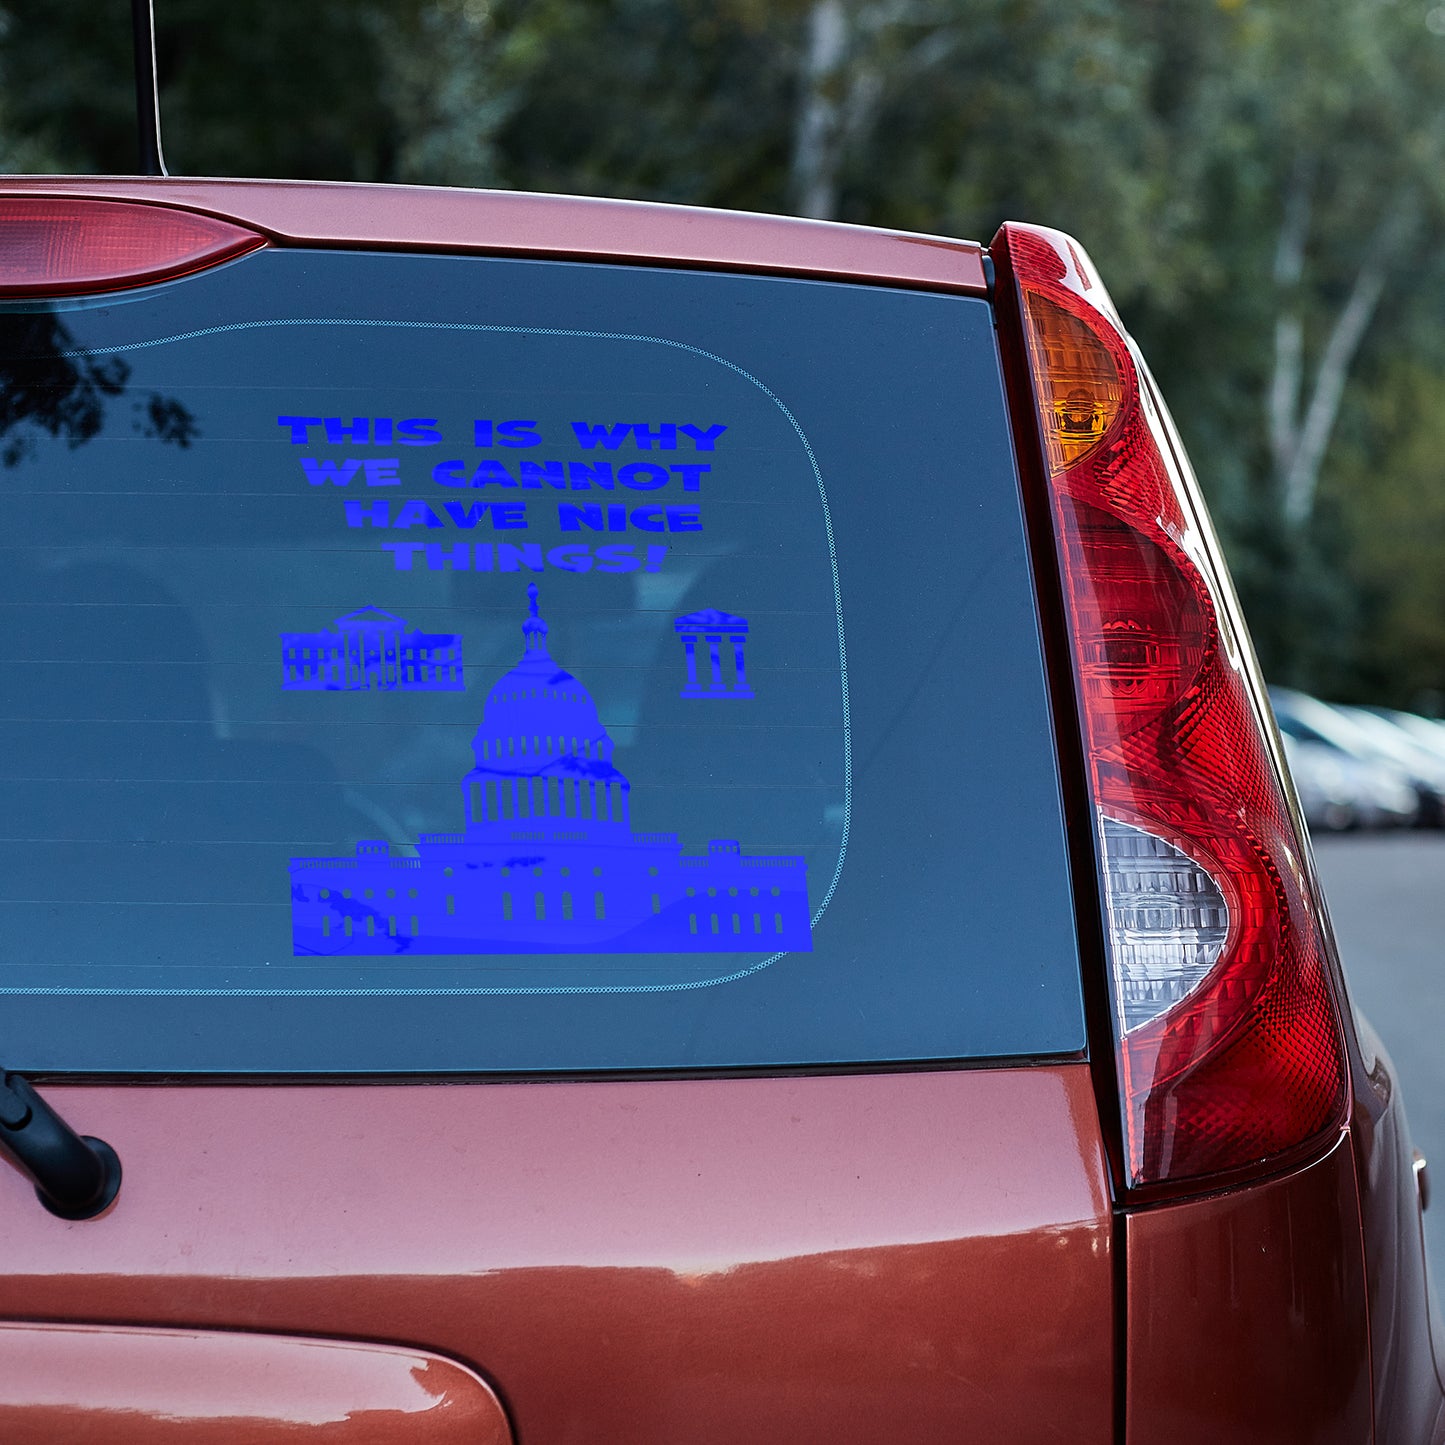 This is why we cannot have nice things Vinyl decal decal stickers Decals for cars Decals for Trucks decals for tumblers minivan sticker SUV decals truck decals window decal car Window decals window decor